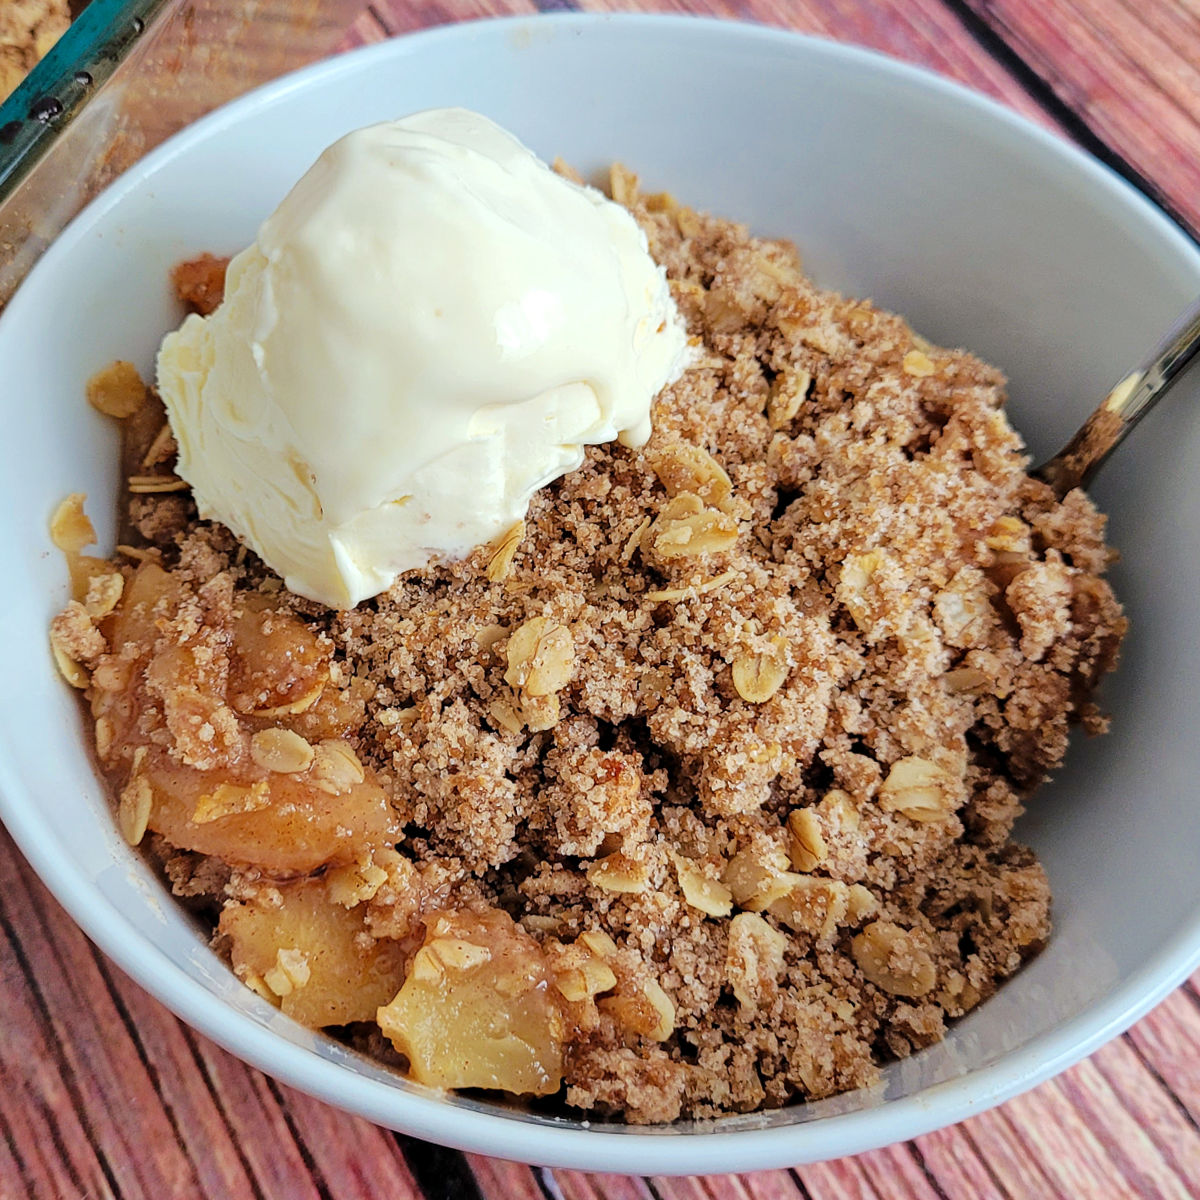 Gluten free apple crisp topped with vanilla ice cream in a small bowl.